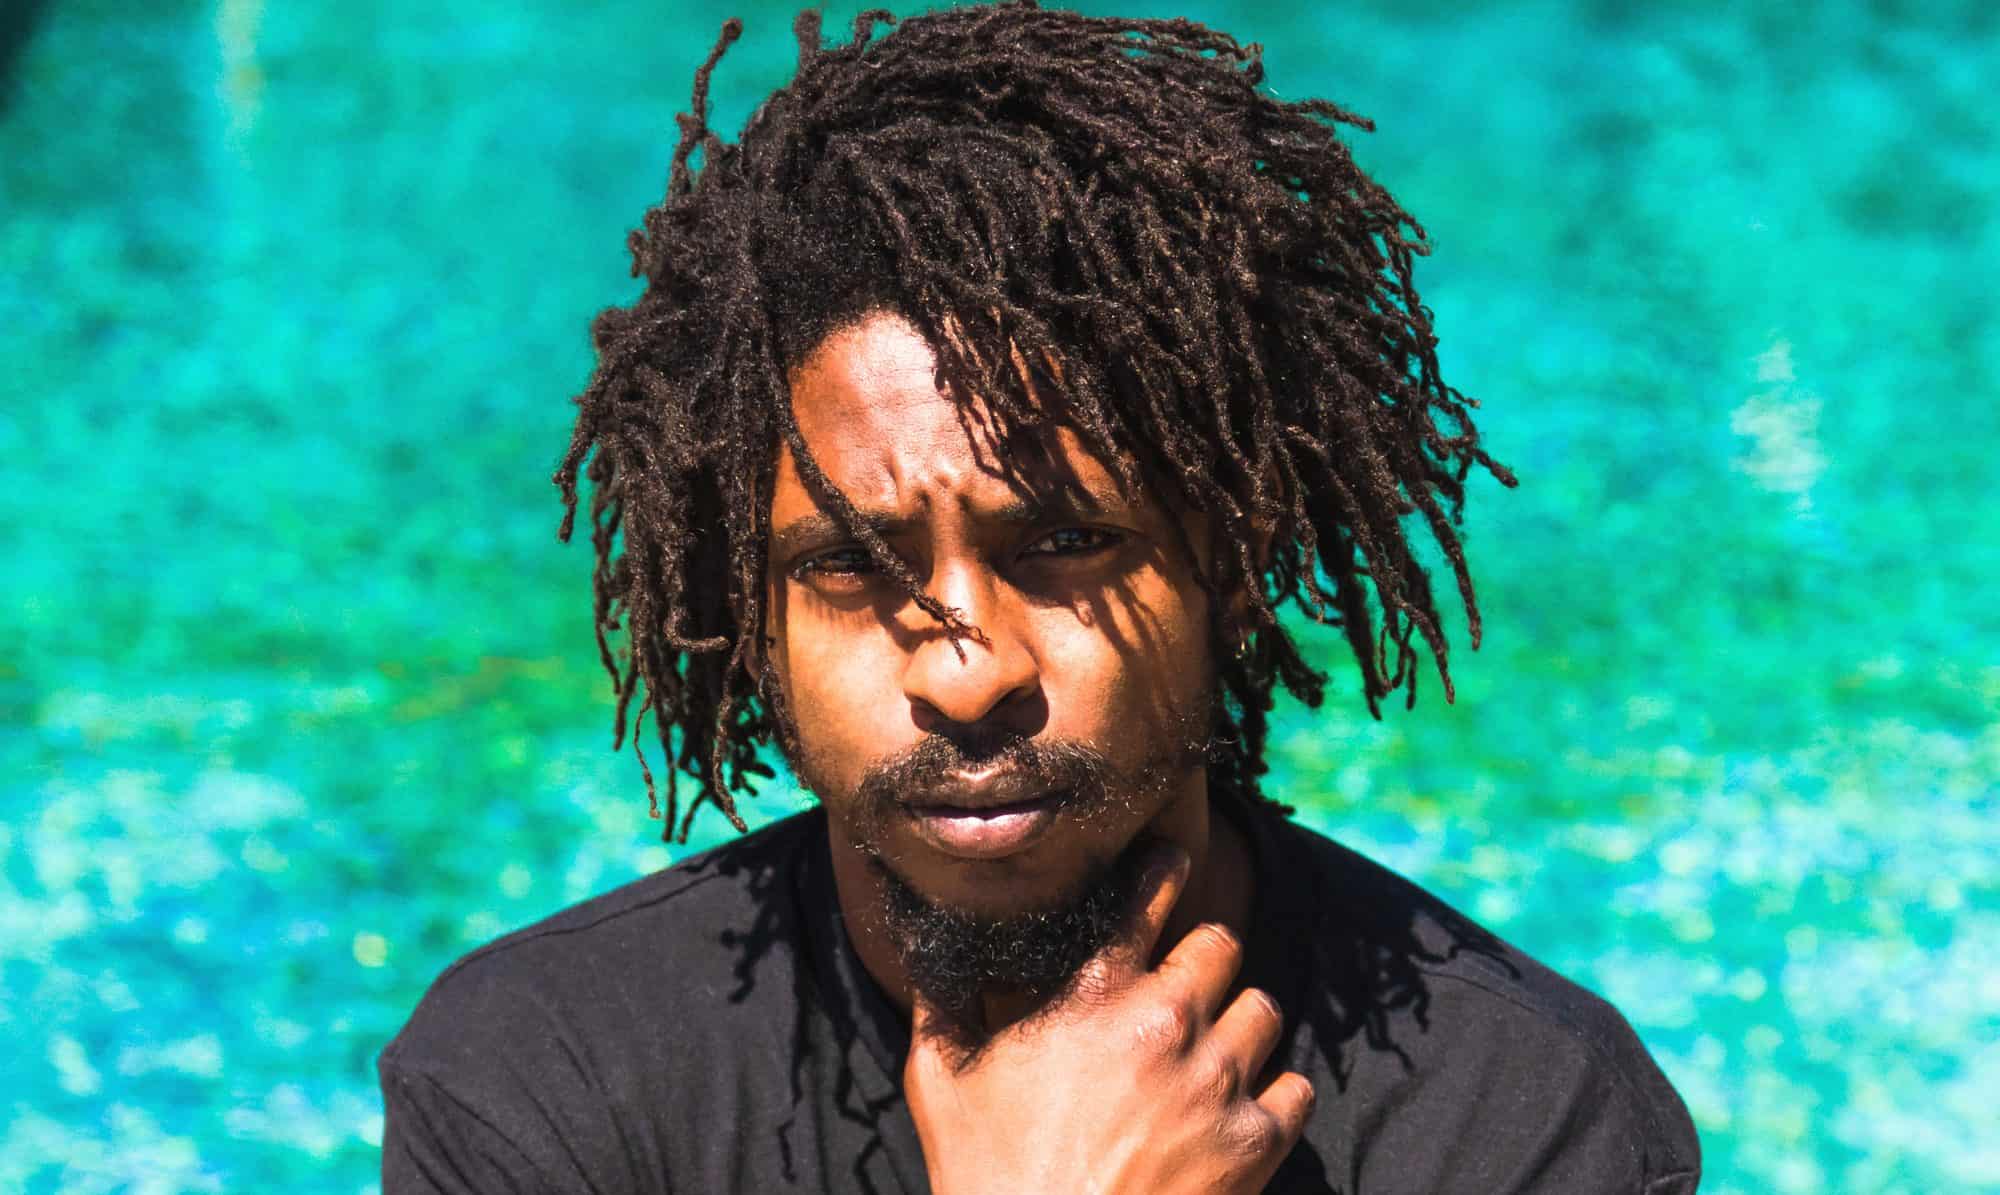 shwayze and cisco island in the sun rar download